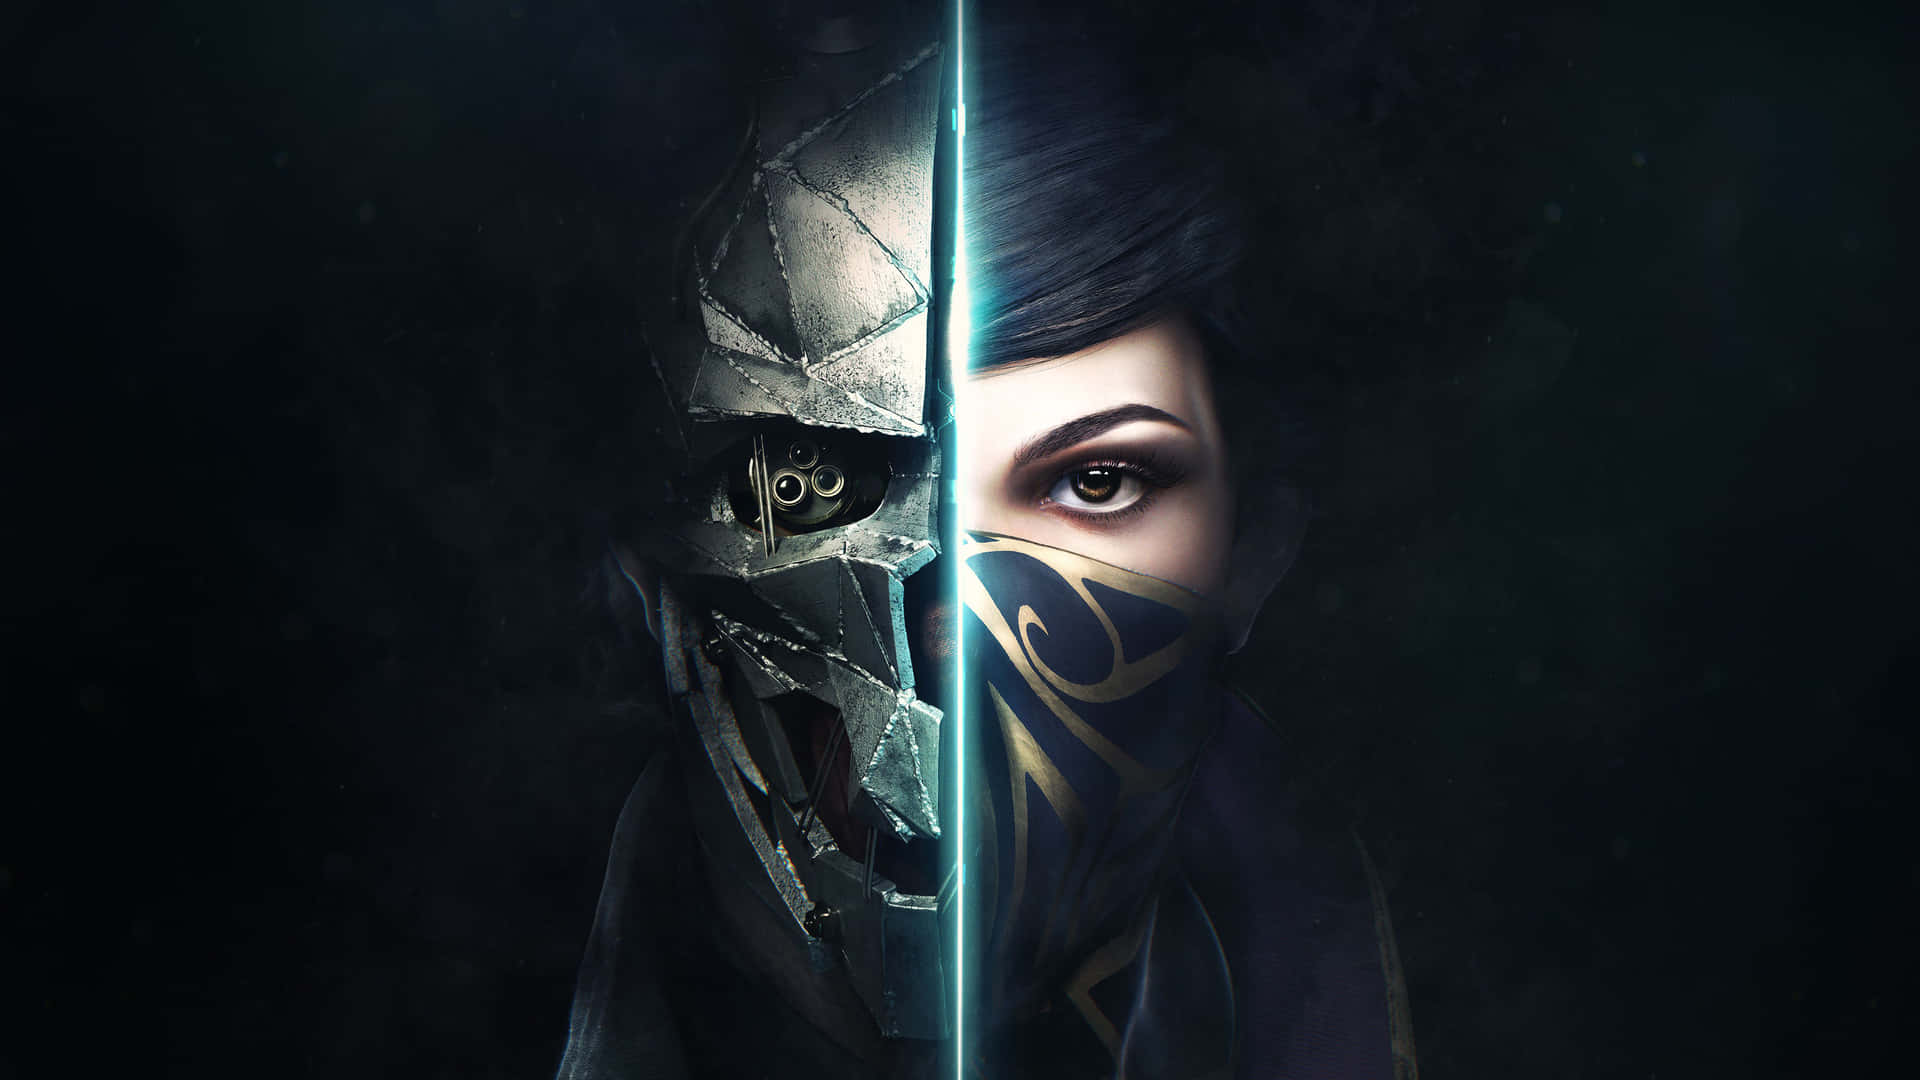 Step into a supernatural world of mystery with Dishonored 2